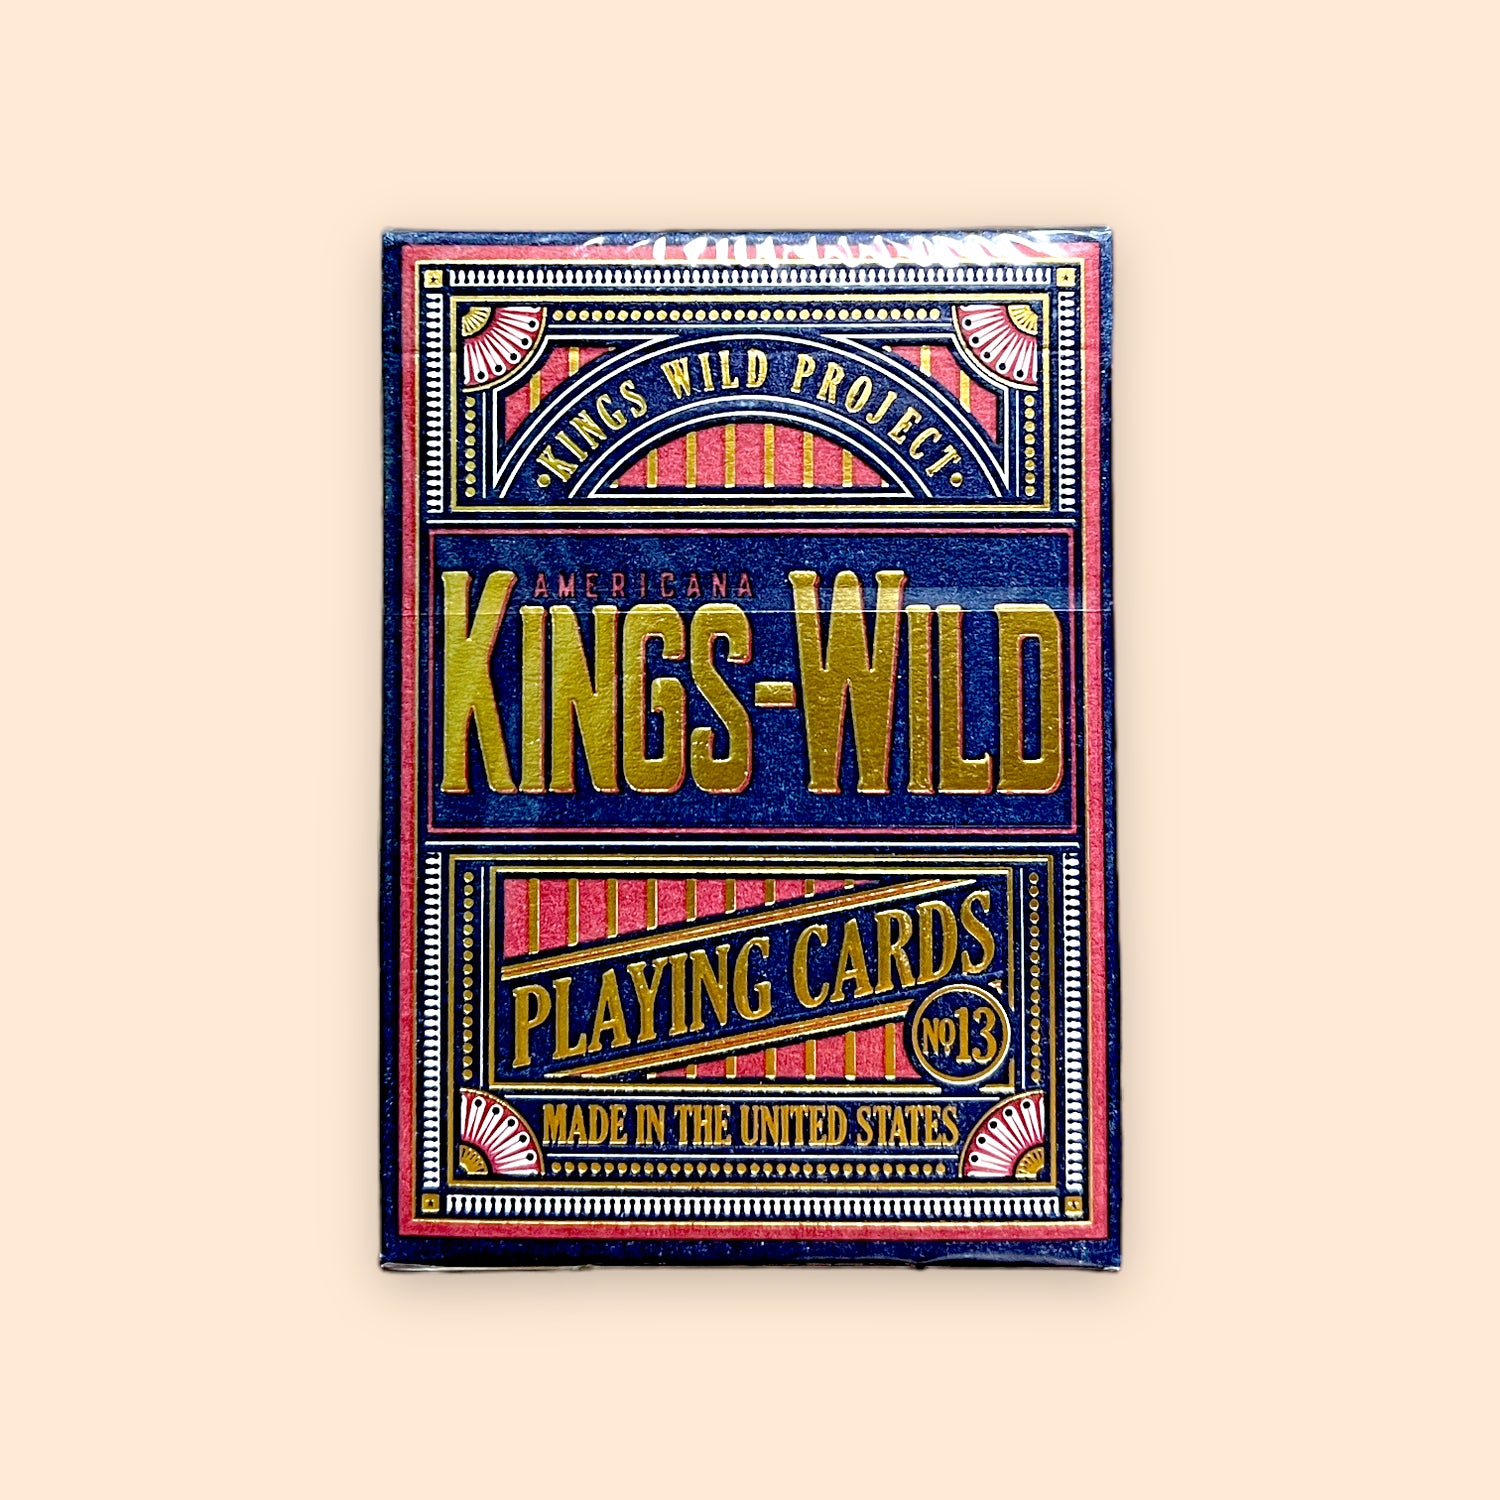 Kings Wild Americanas Artist Proof playing cards